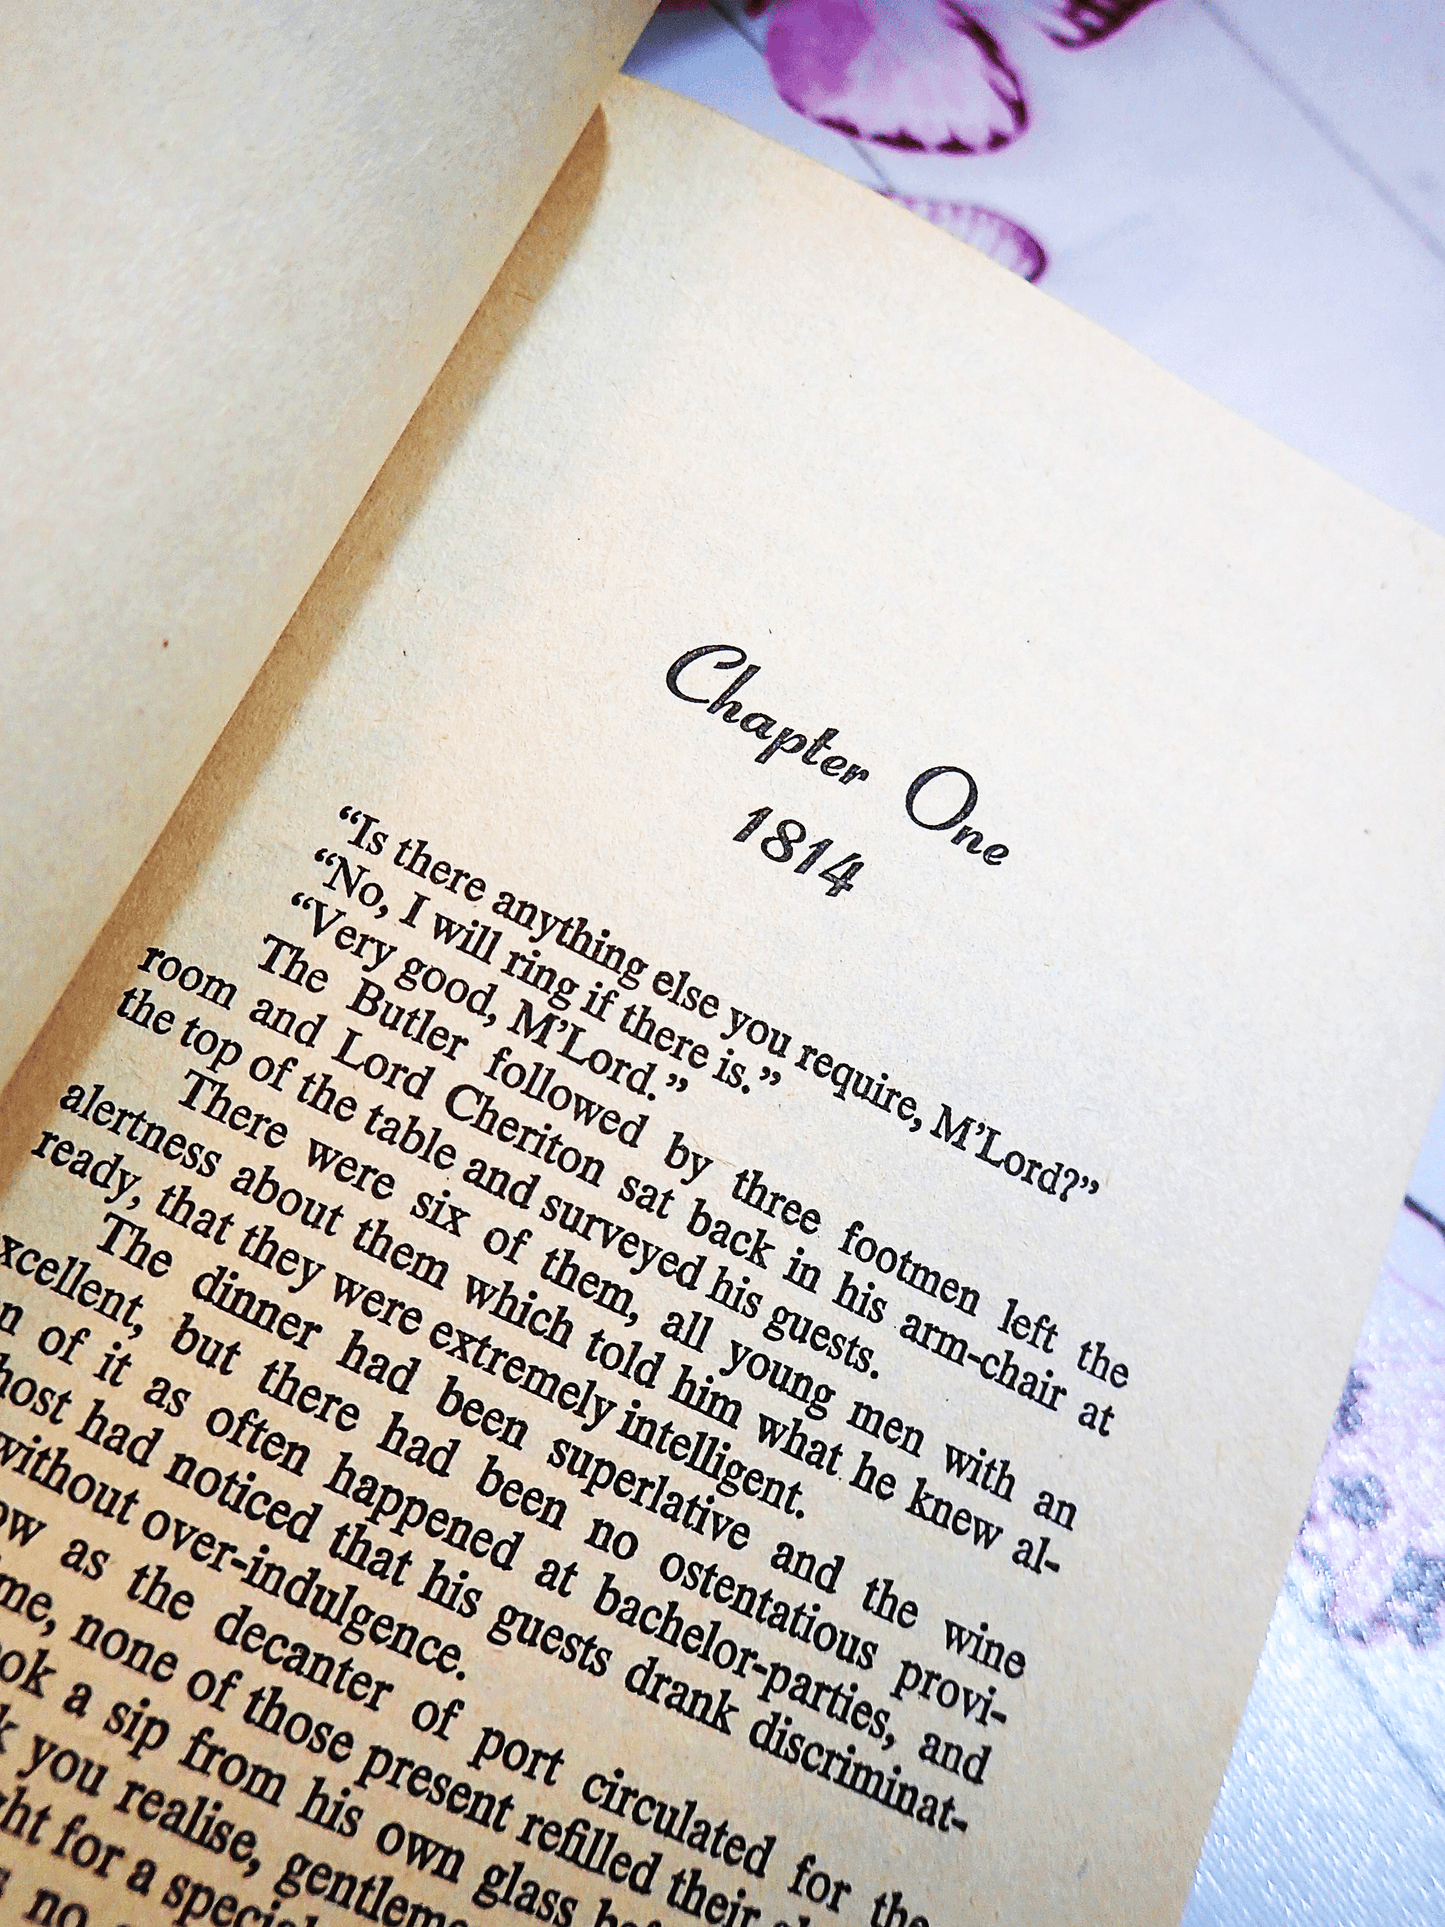 First page of Love and the Loathsome Leopard Barbara Cartland Corgi Paperback showing text: "Chapter One, 1814 - Is there anything else you require, M'Lord?"